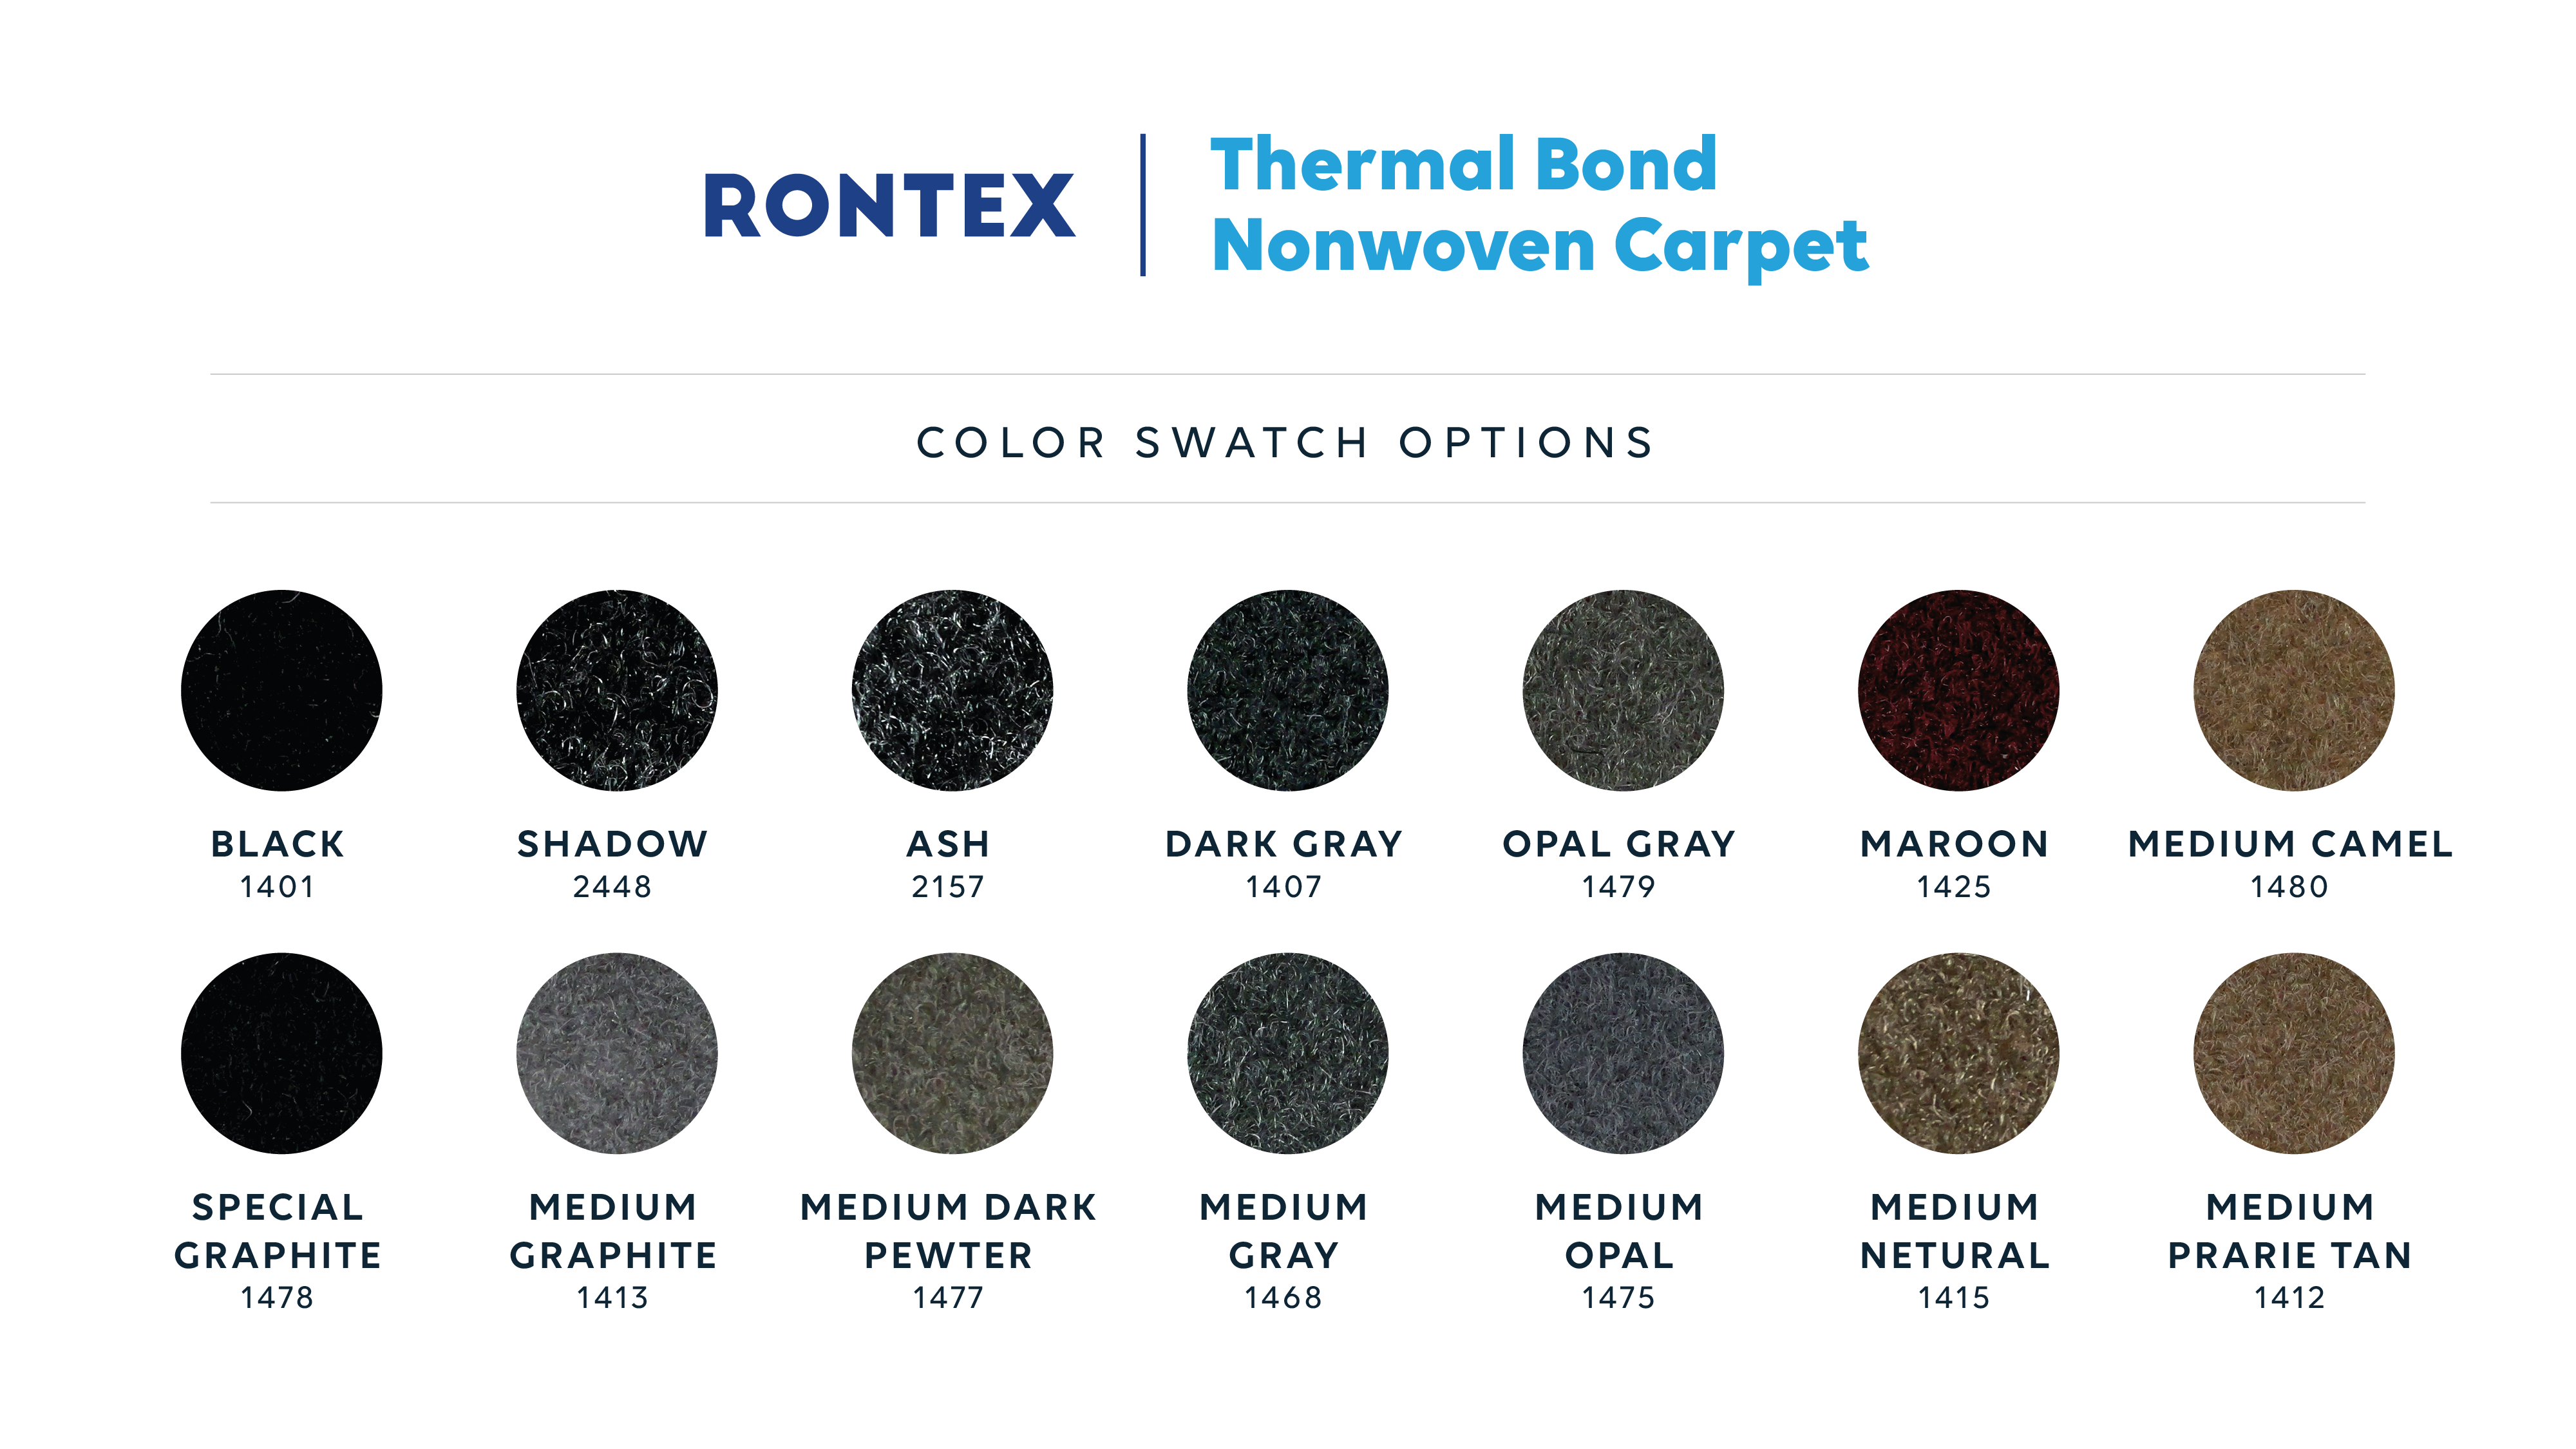 Rontex image swatches thermal bond